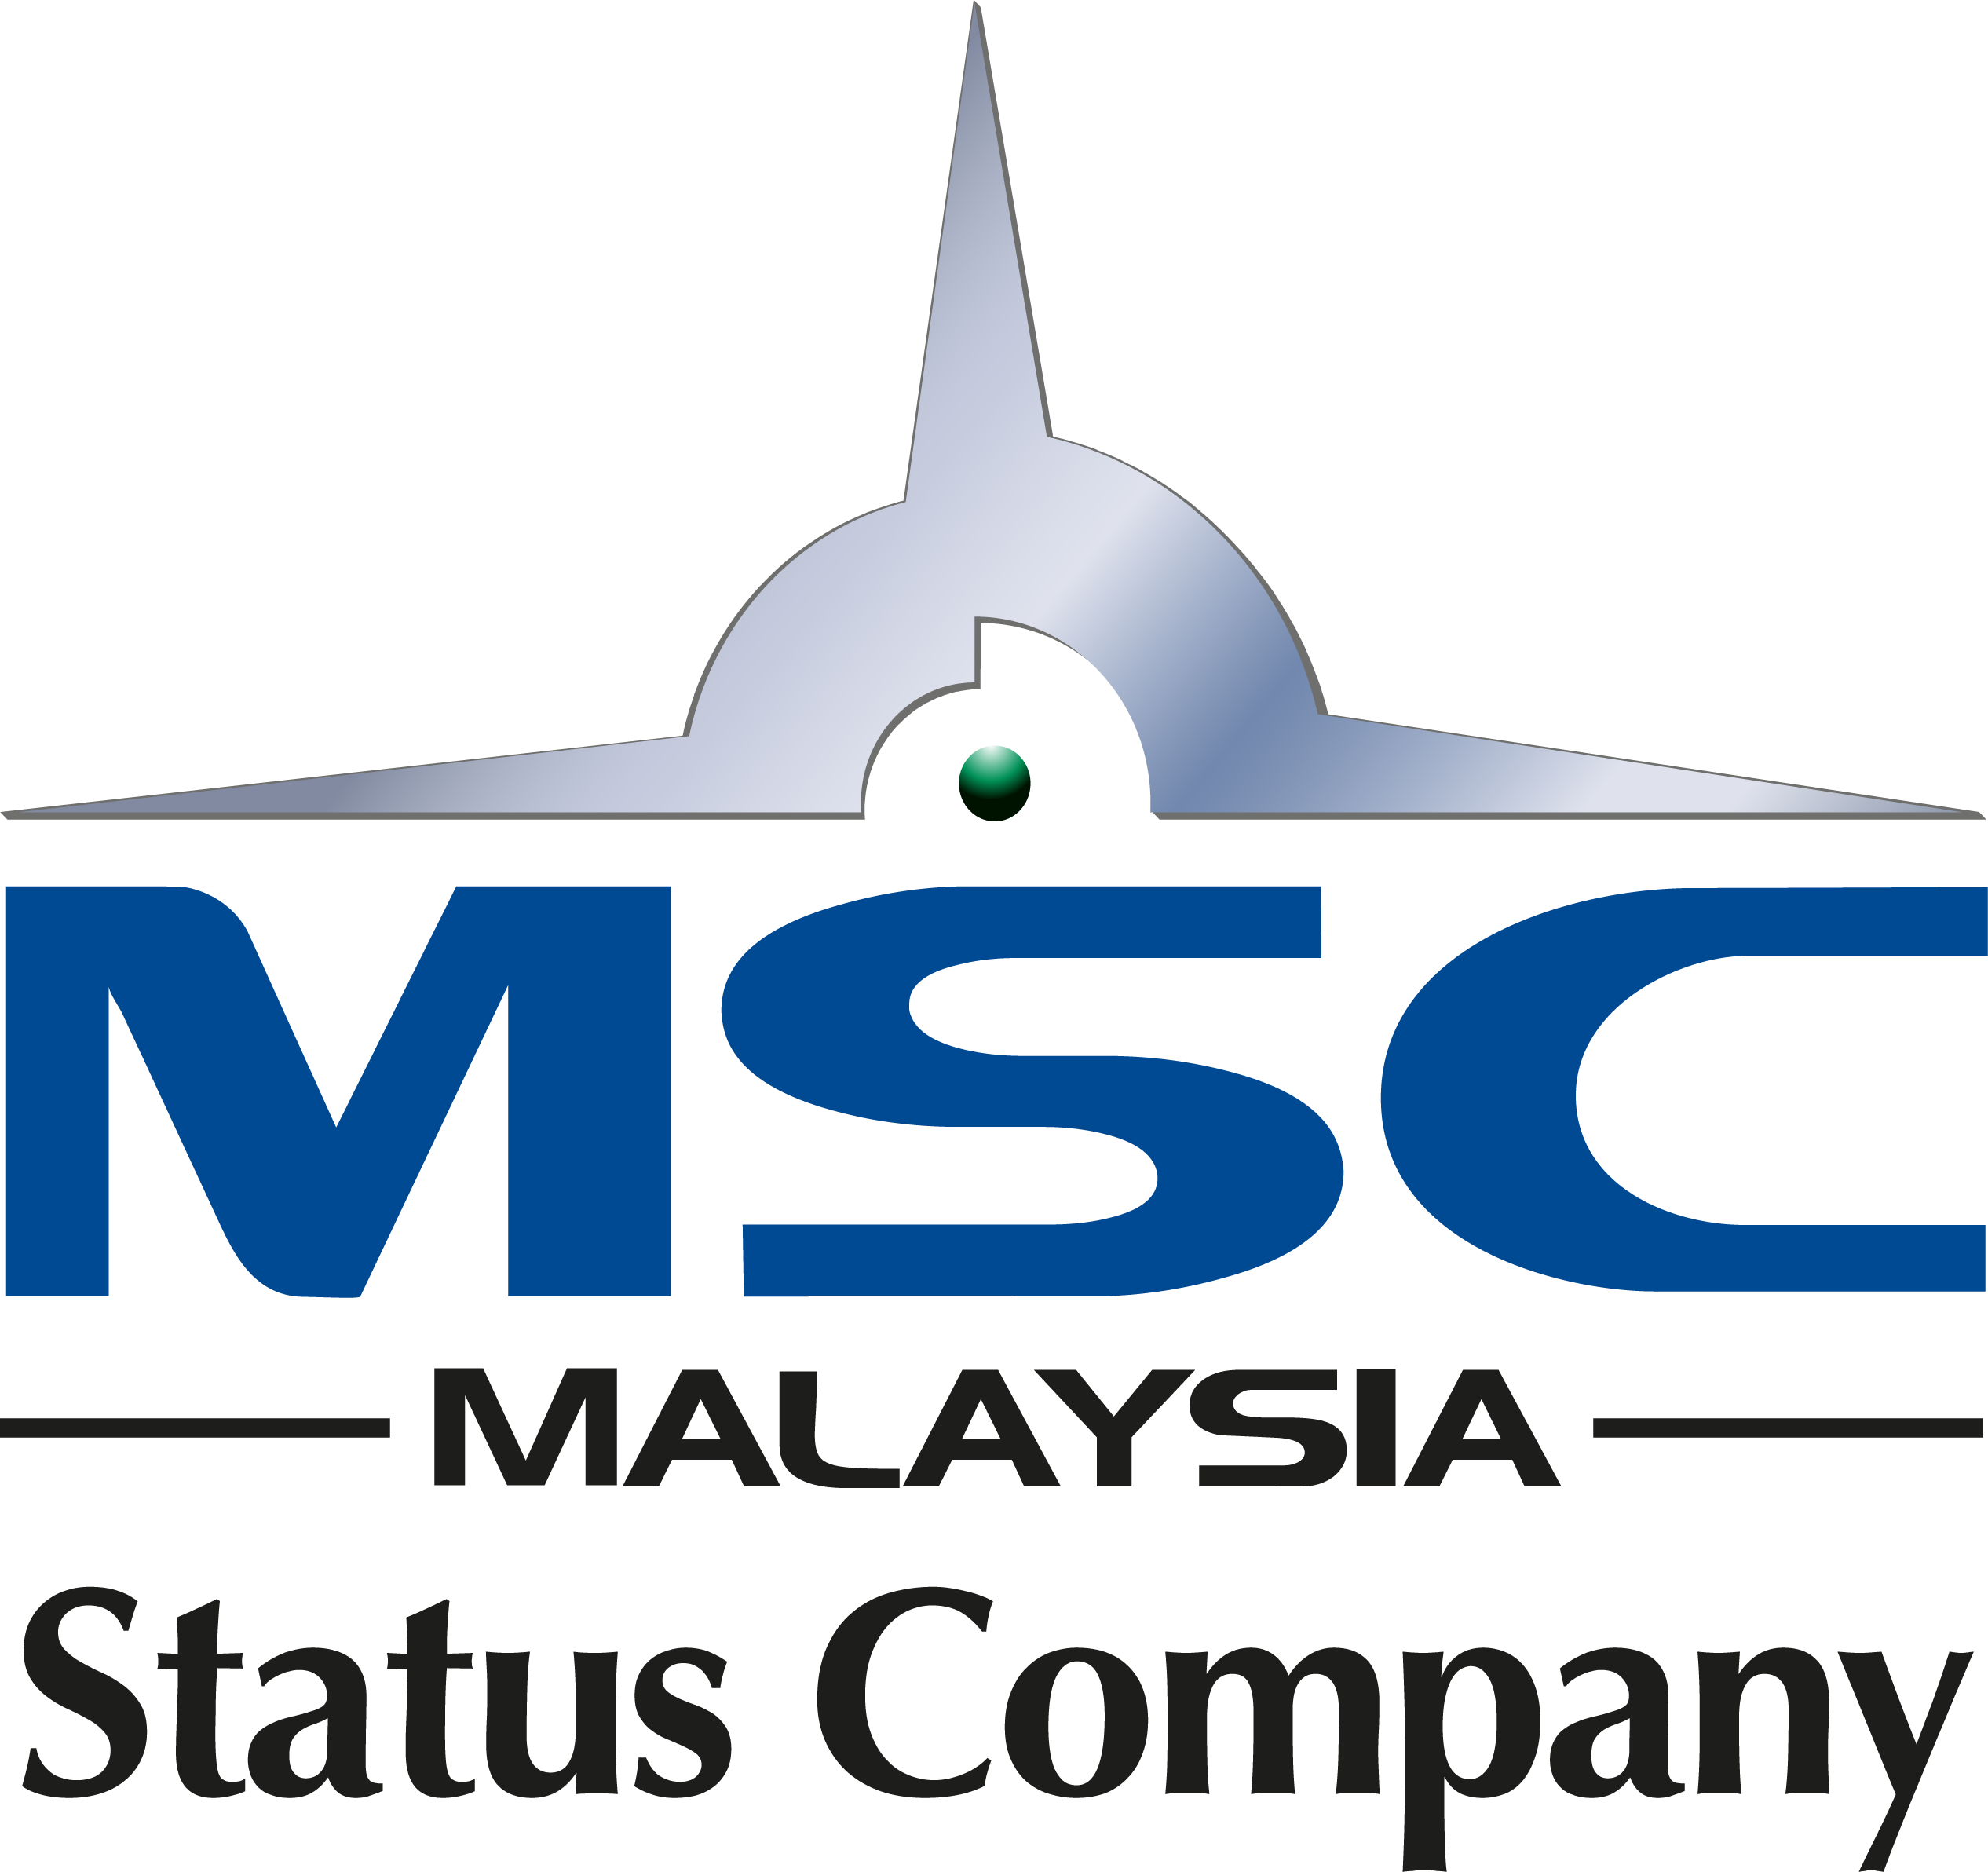 Mocean was awarded as MSC Company in Malaysia